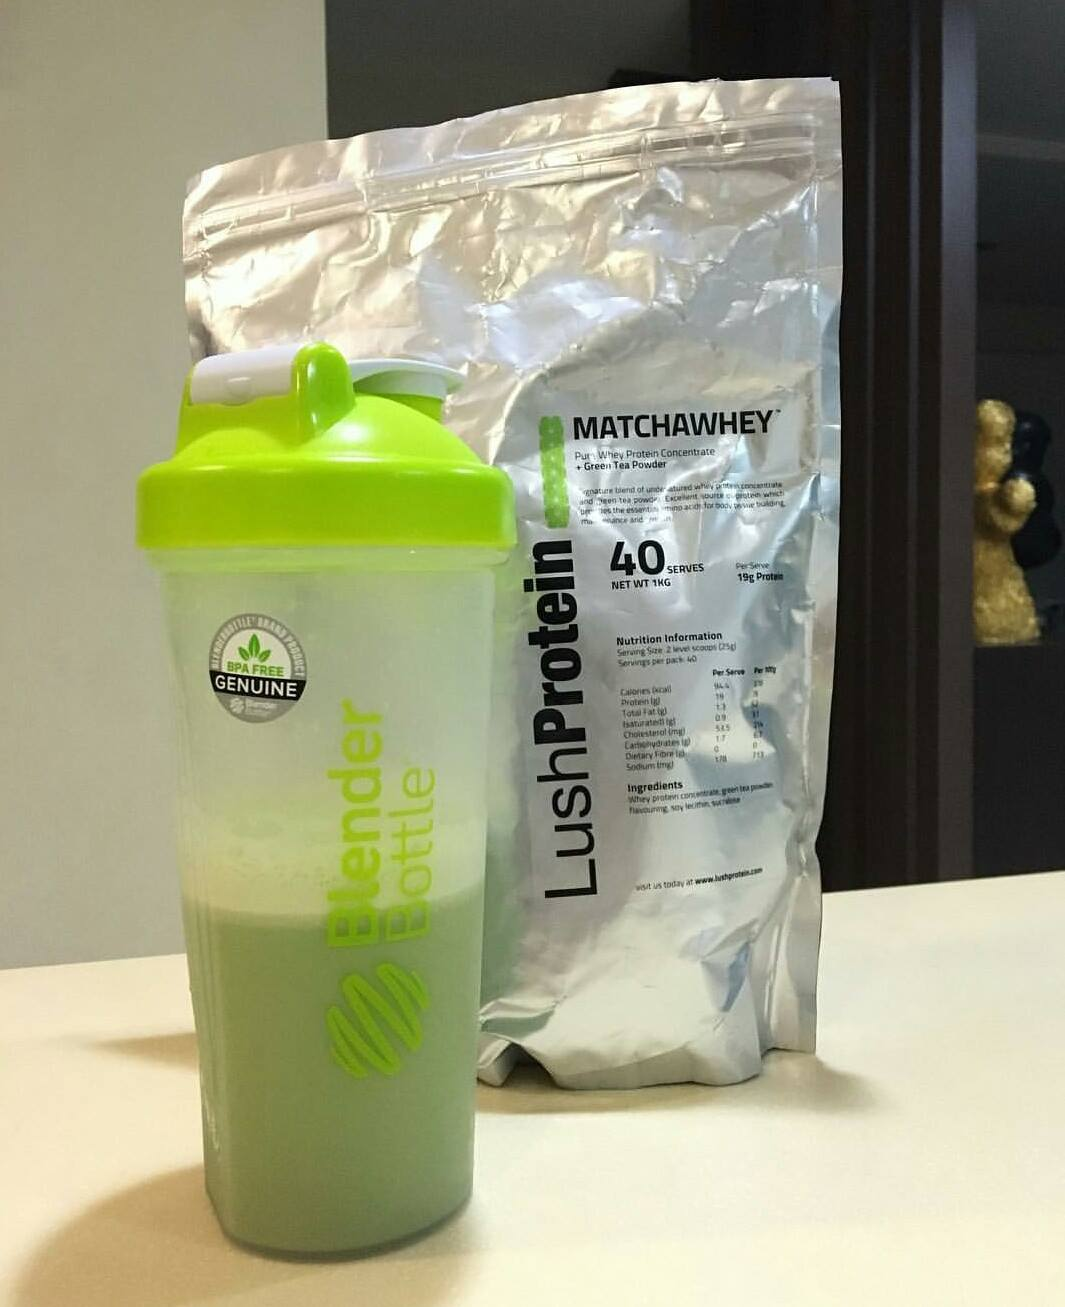 lushprotein matchawhey is a 2-in-1 protein powder with energy boosting properties